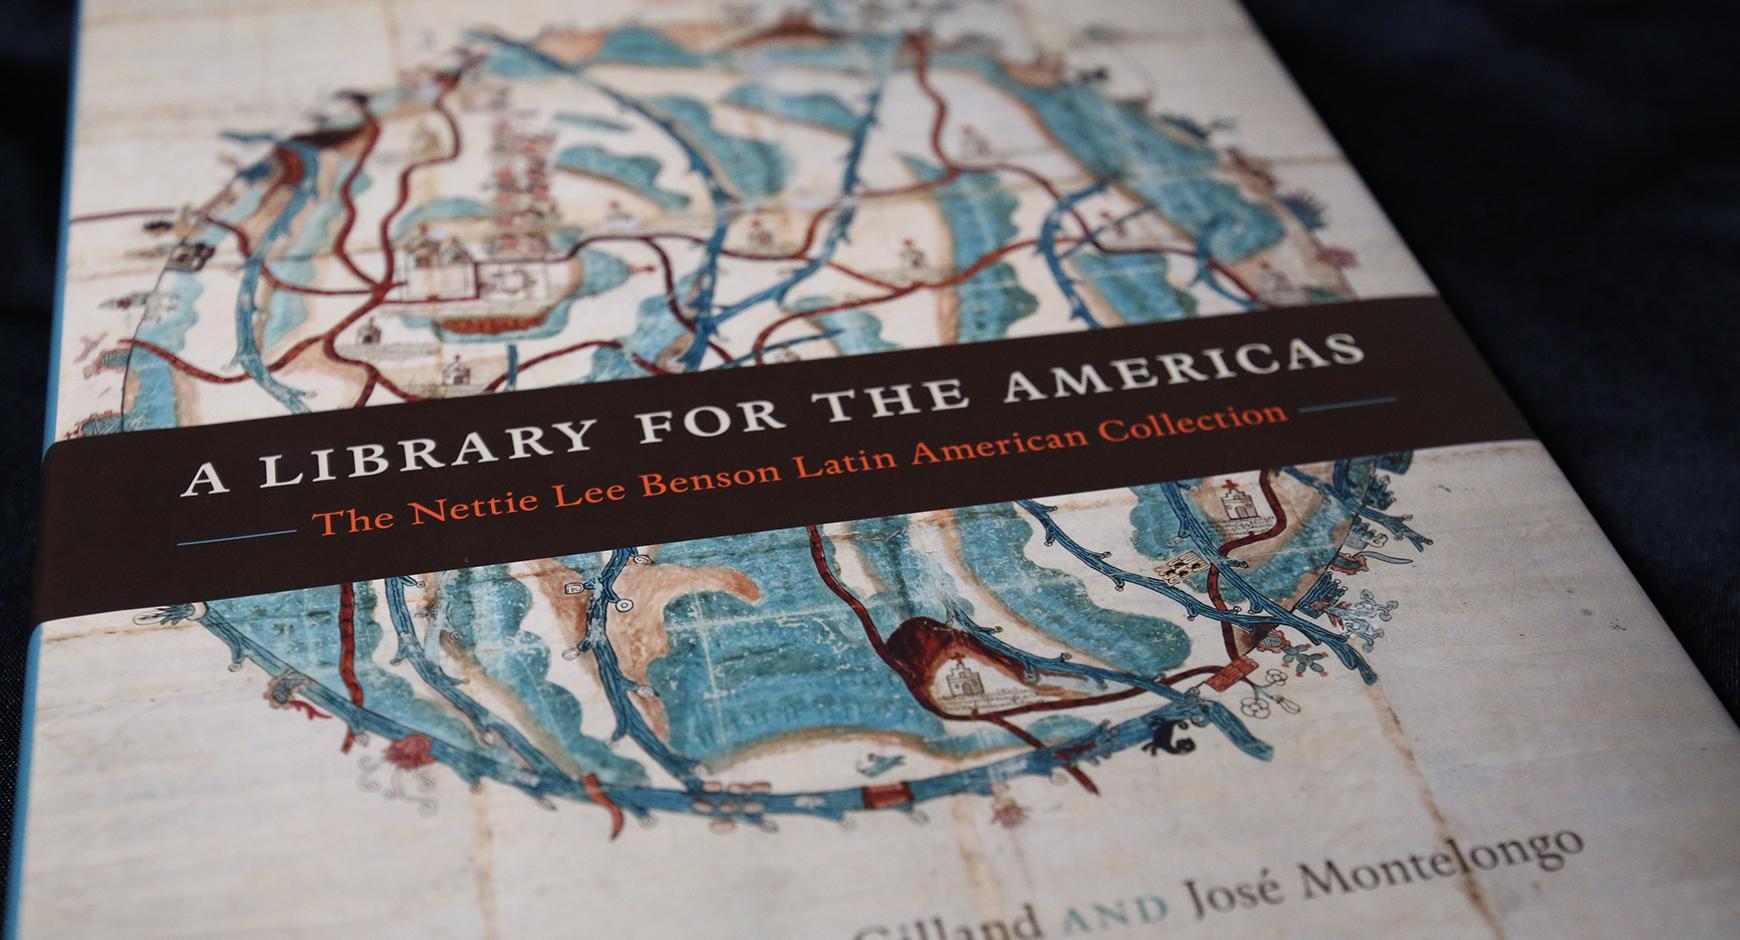 "A Library for the Americas" book